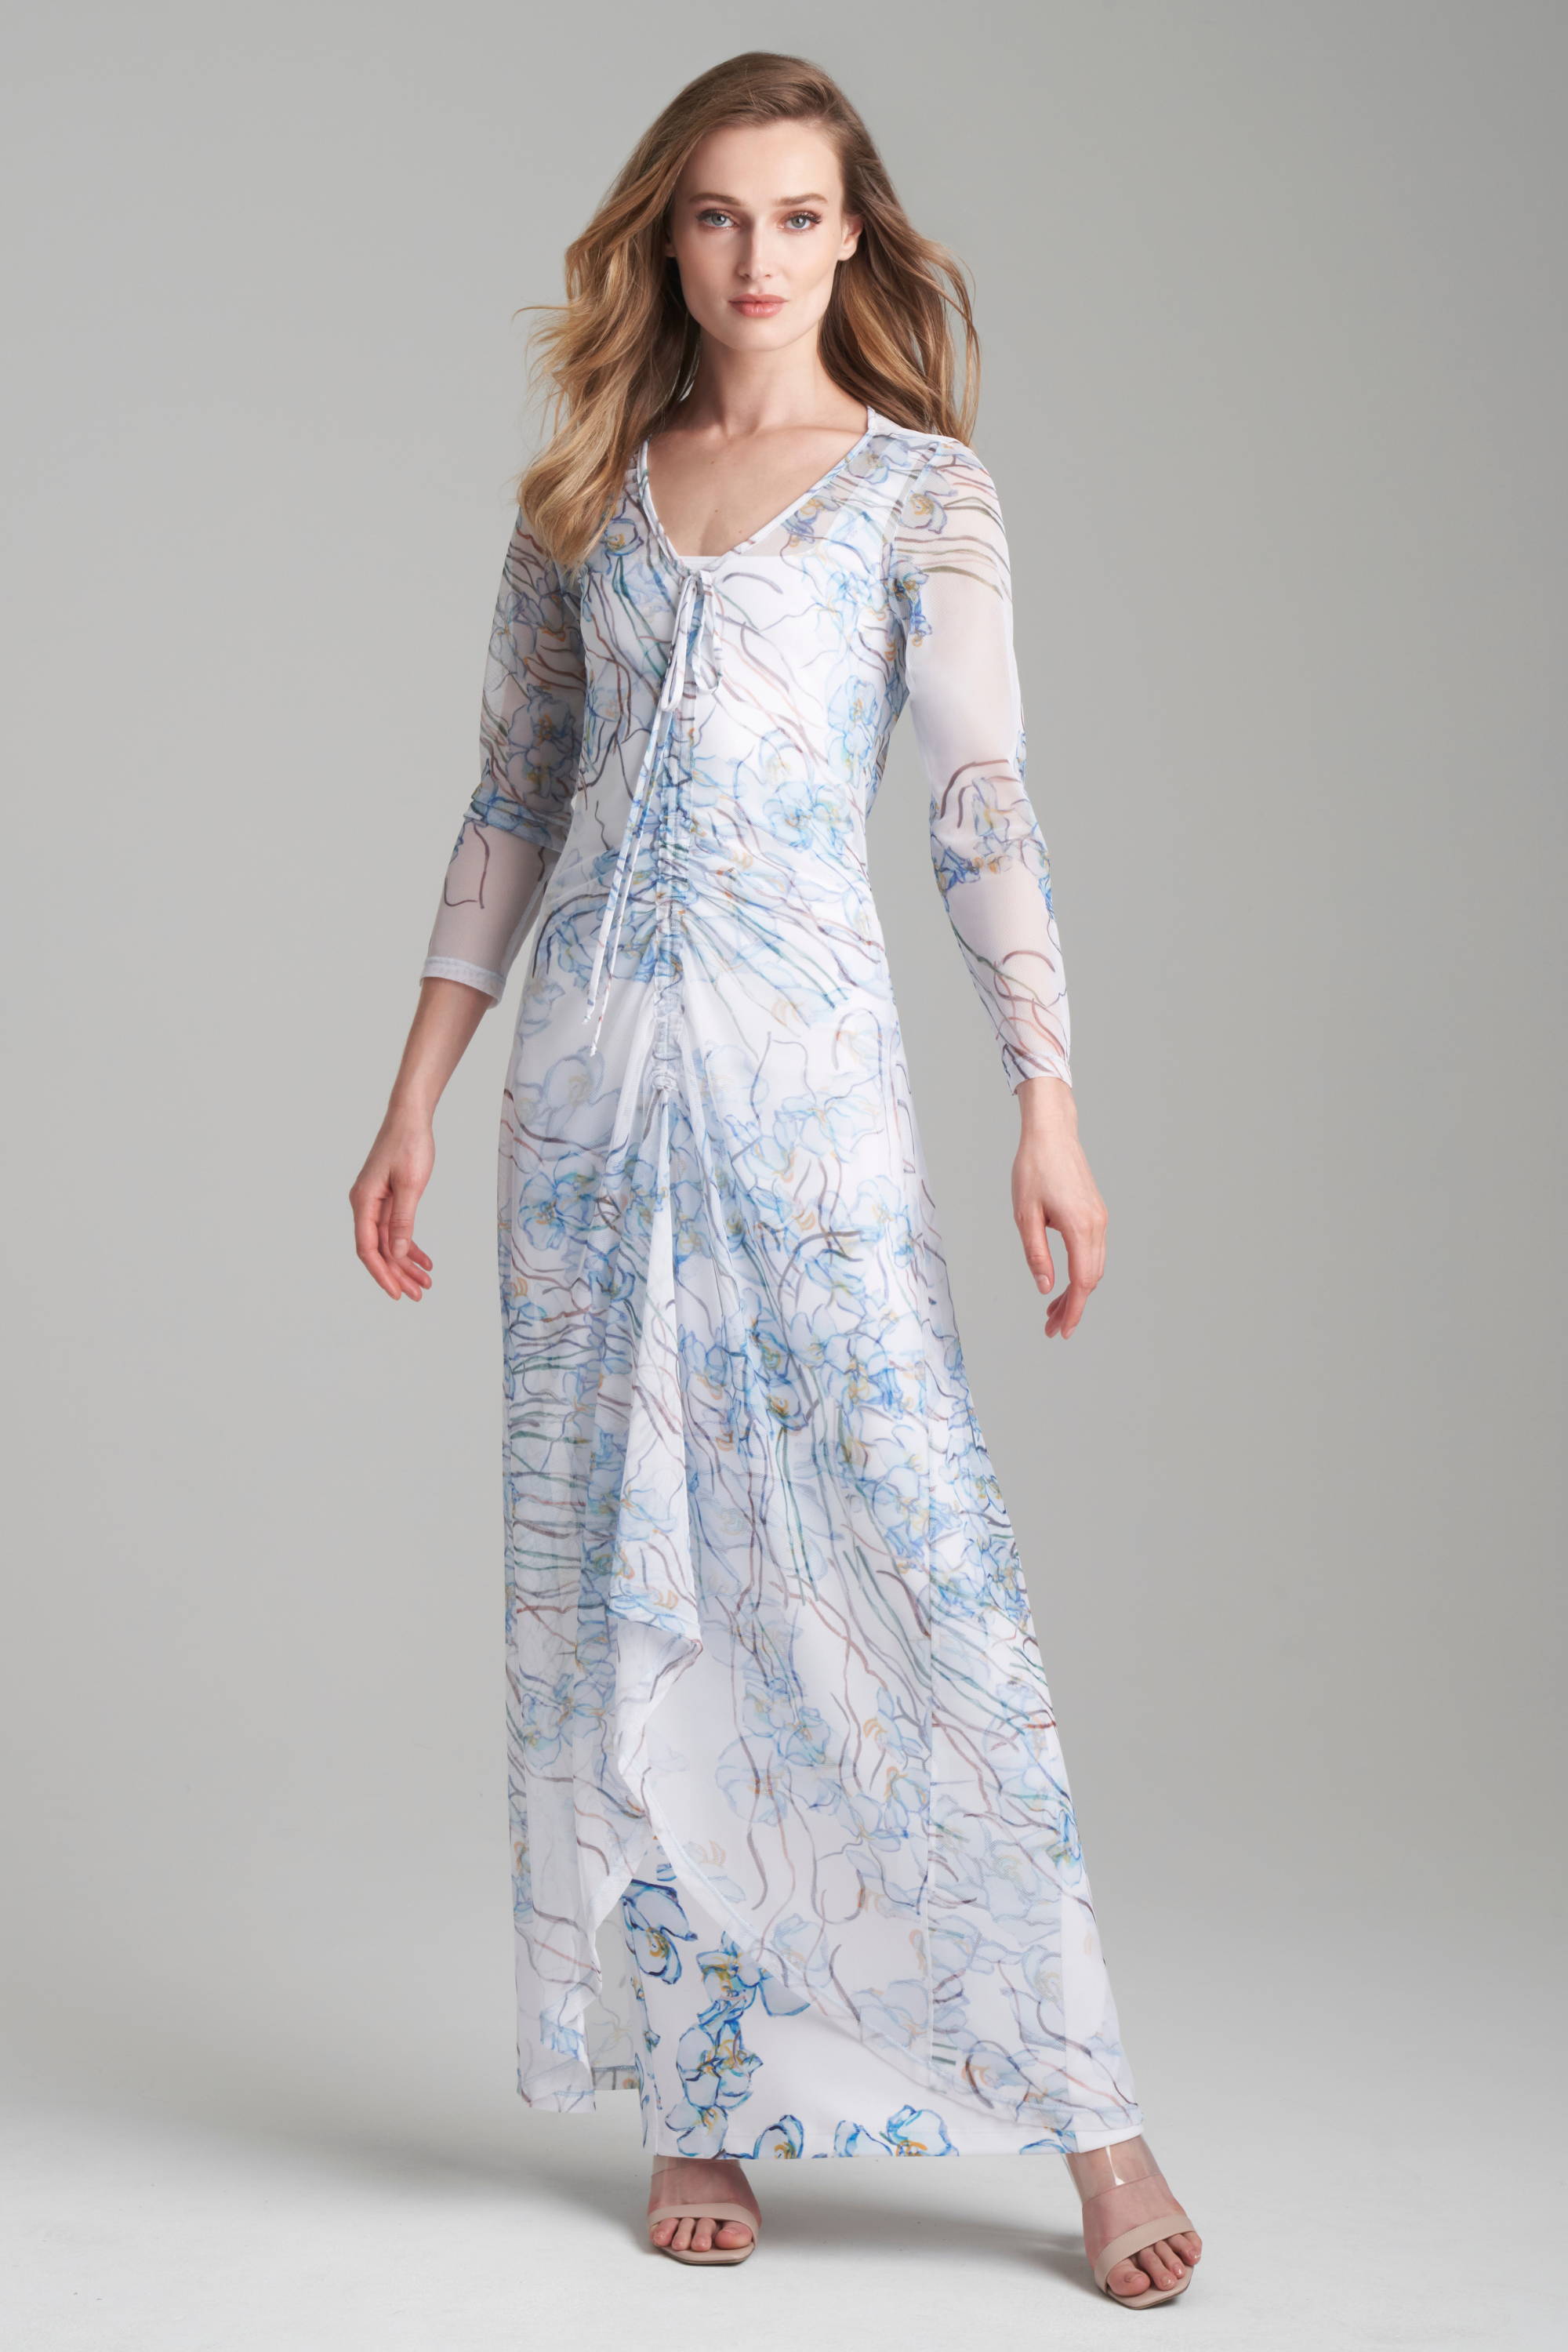 Woman wearing mes dress topper over long stretch knit floral printed dress by Ala von Auersperg for spring 2024